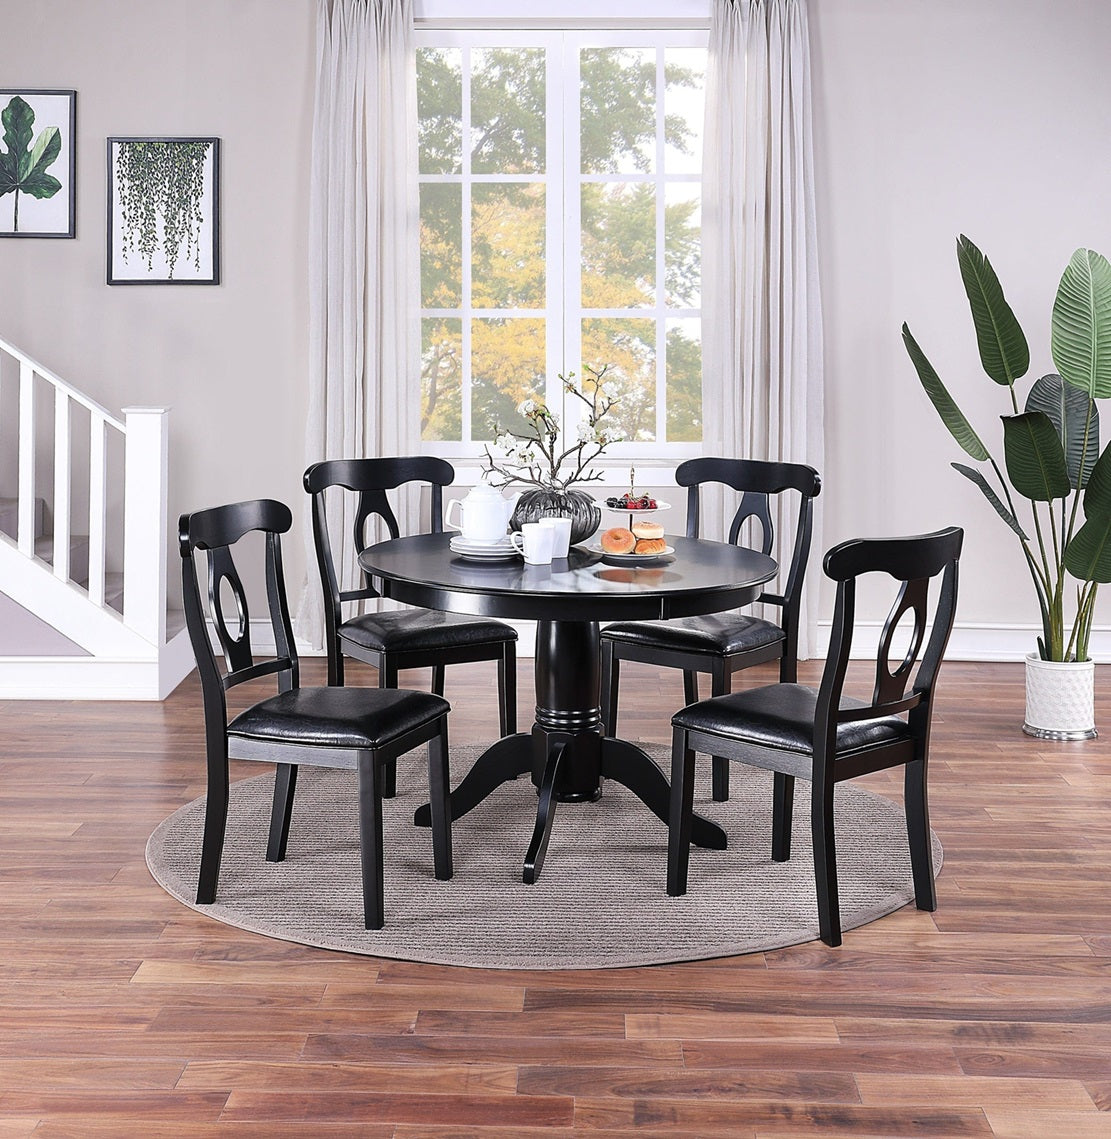 1st Choice Furniture Direct 1st Choice Round Table and Chairs Complete Dining Set in Classic Black